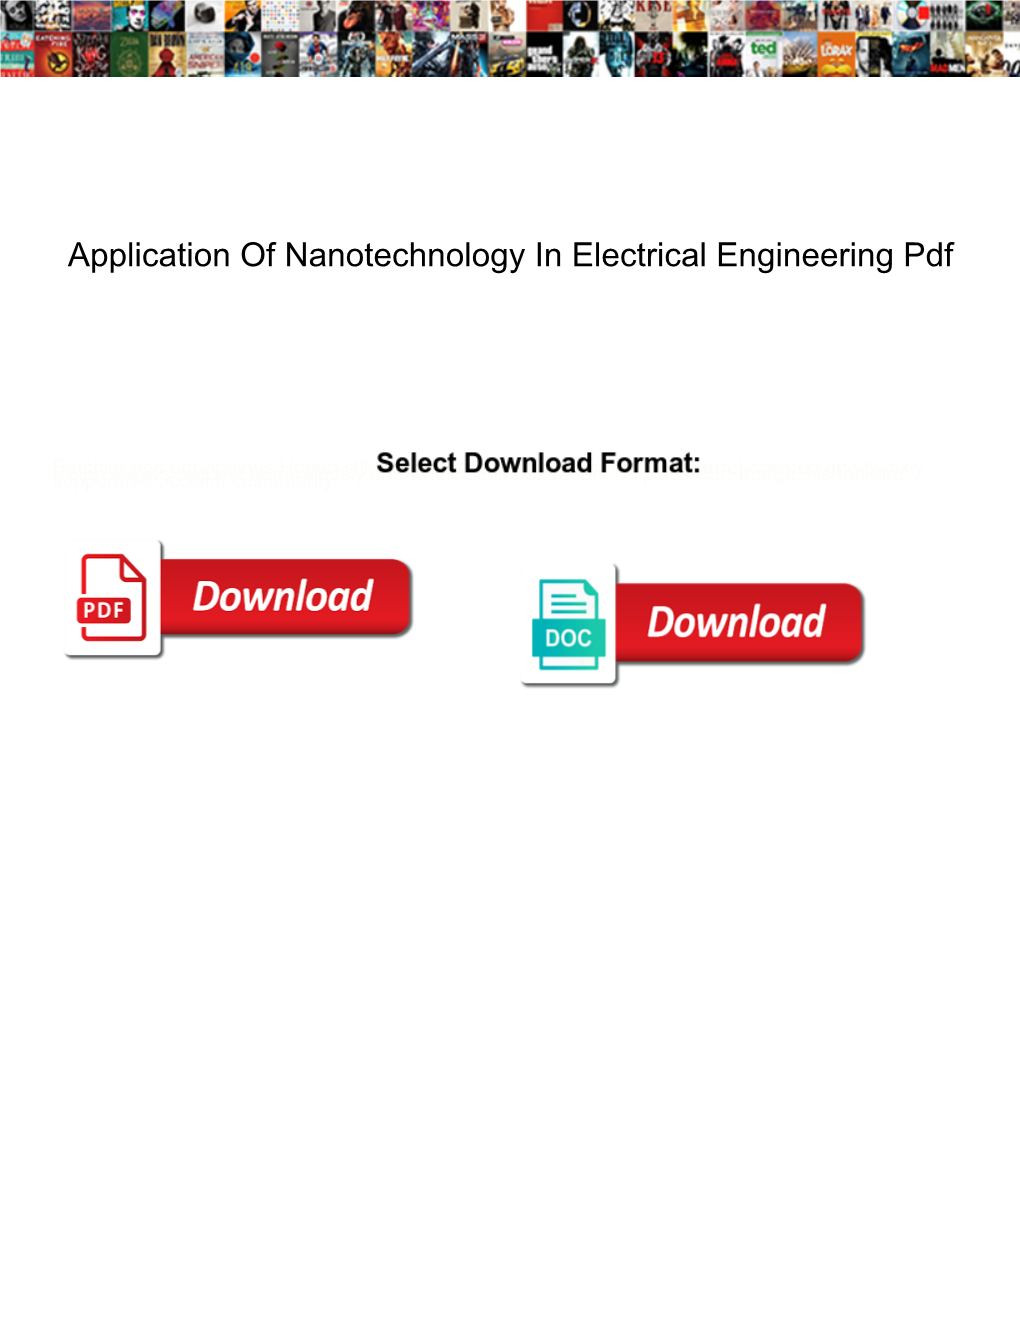 Application of Nanotechnology in Electrical Engineering Pdf